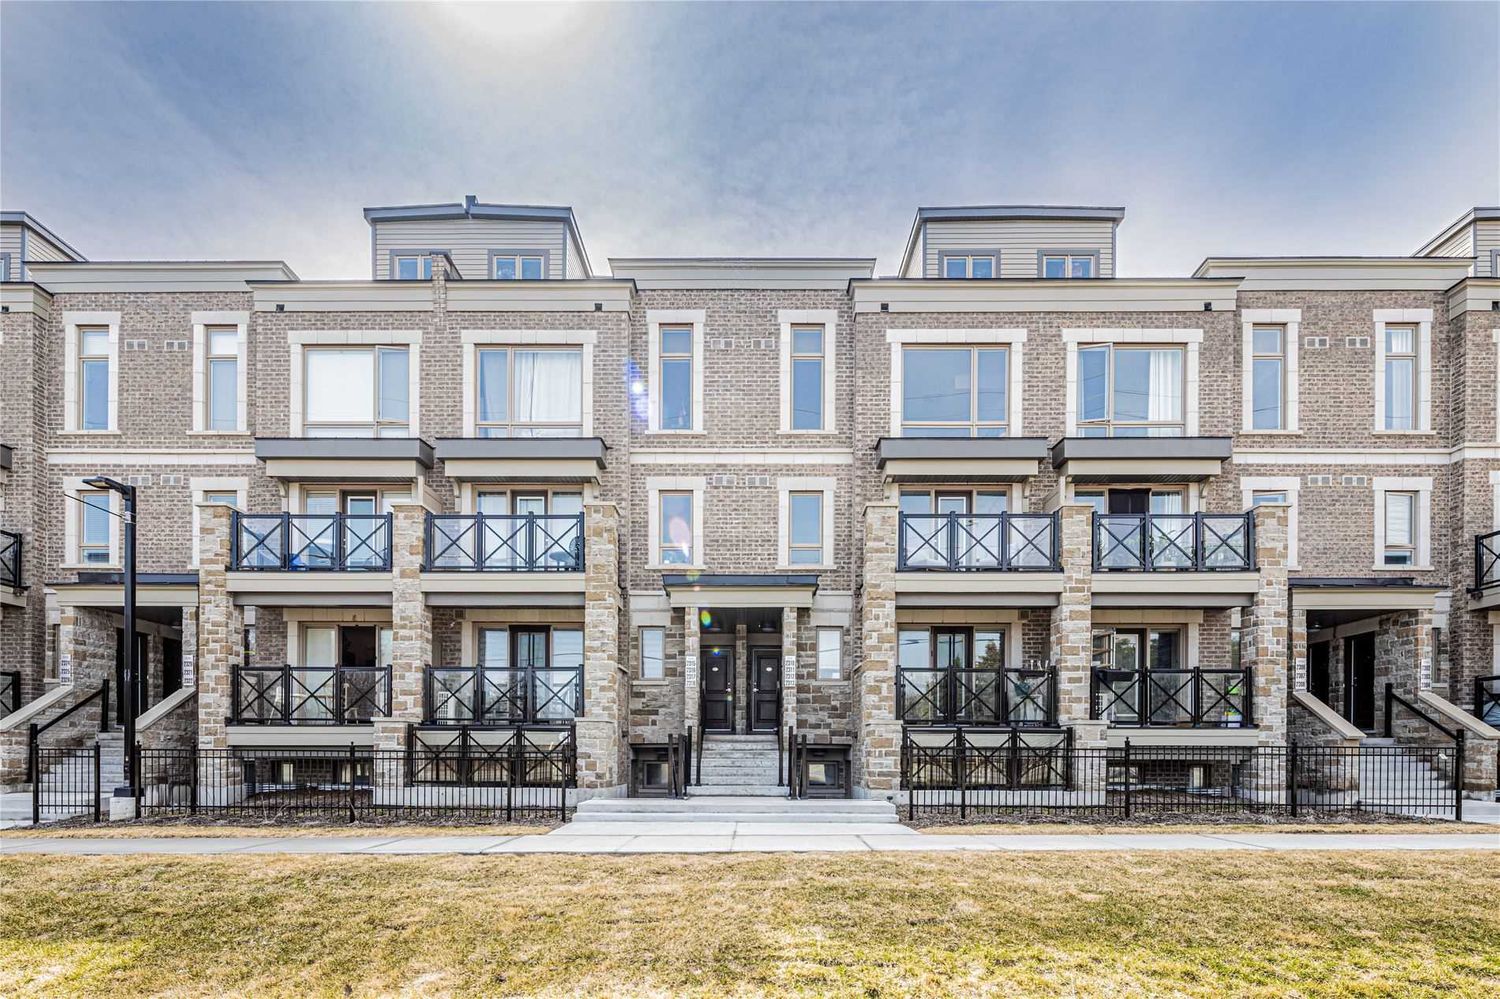 2-21 Westmeath Lane. Grand Cornell Brownstones 2 is located in  Markham, Toronto - image #1 of 2